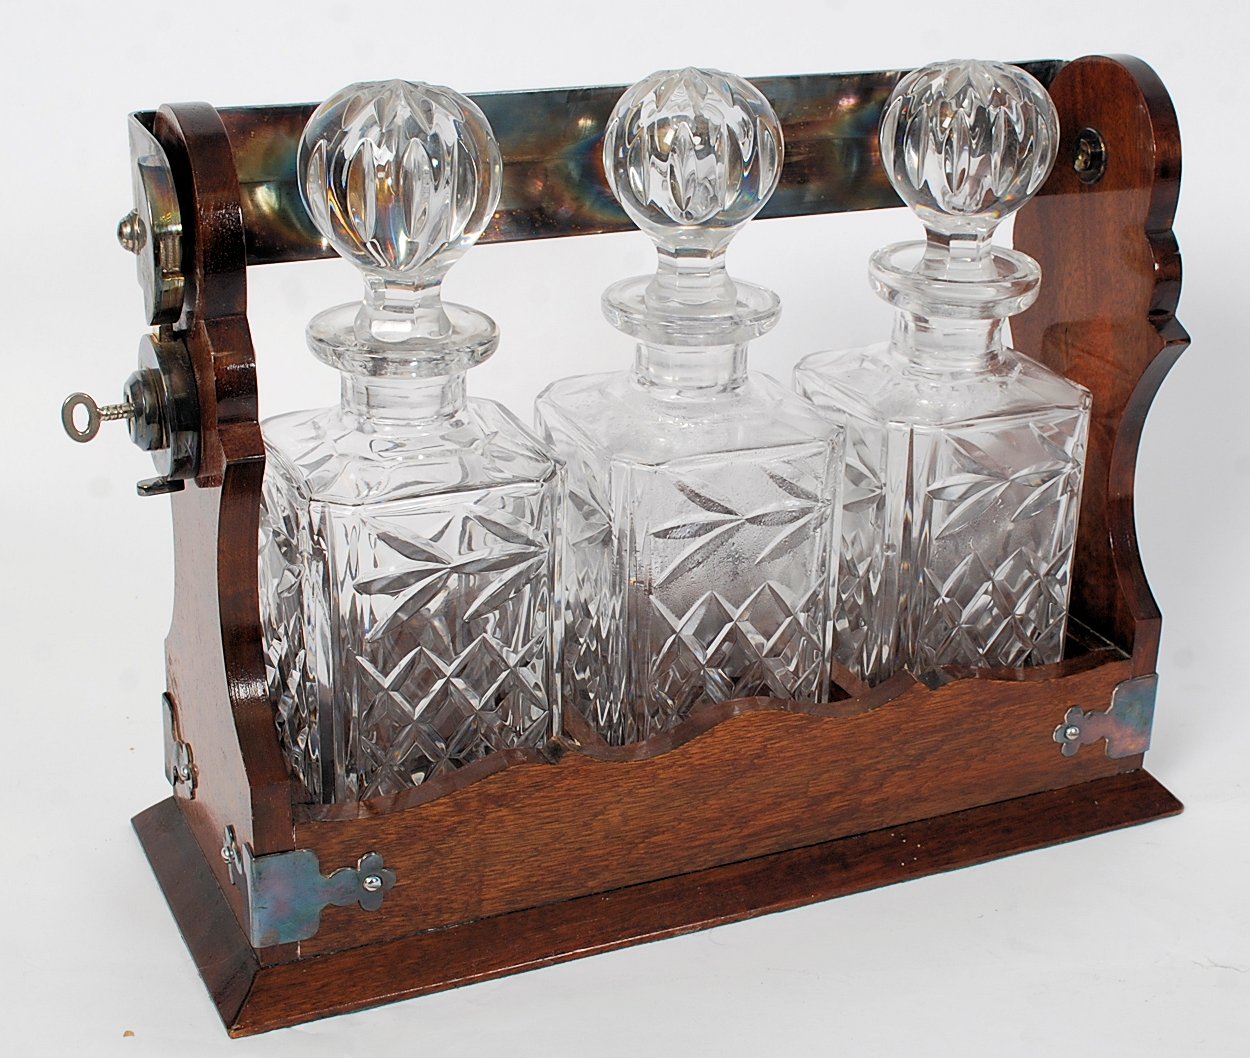 A 19th century Victorian oak and silver plated Tantalus with ornate ivy epns handle and mounting - Image 5 of 6